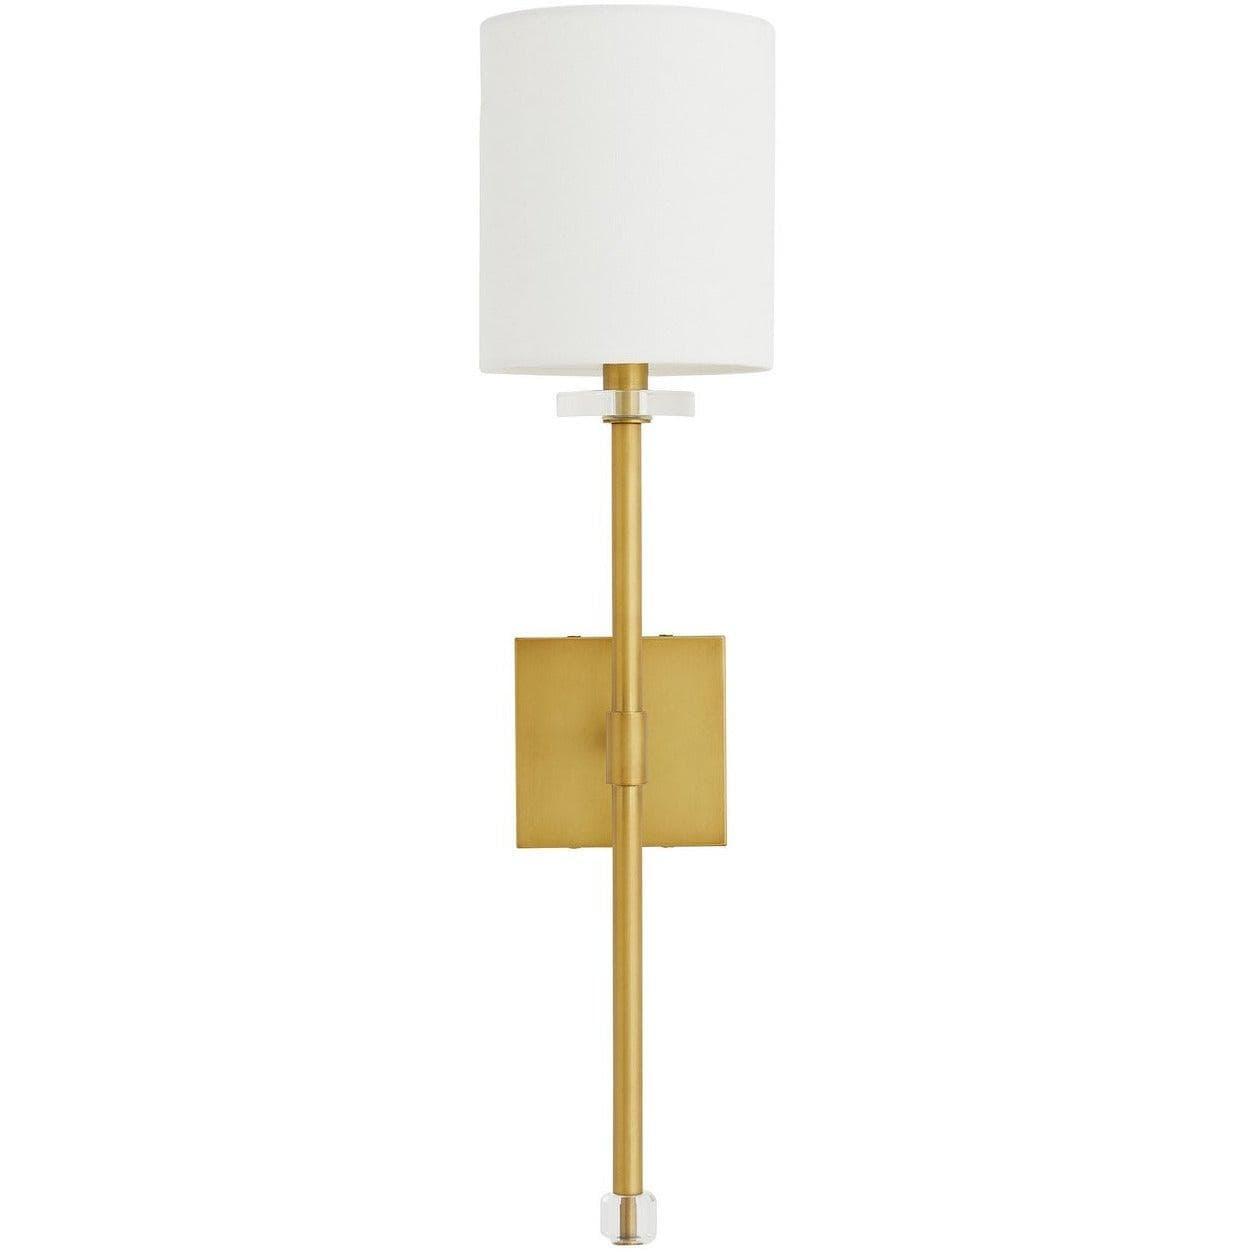 Arteriors - Dixie Wall Sconce - 49383 | Montreal Lighting & Hardware